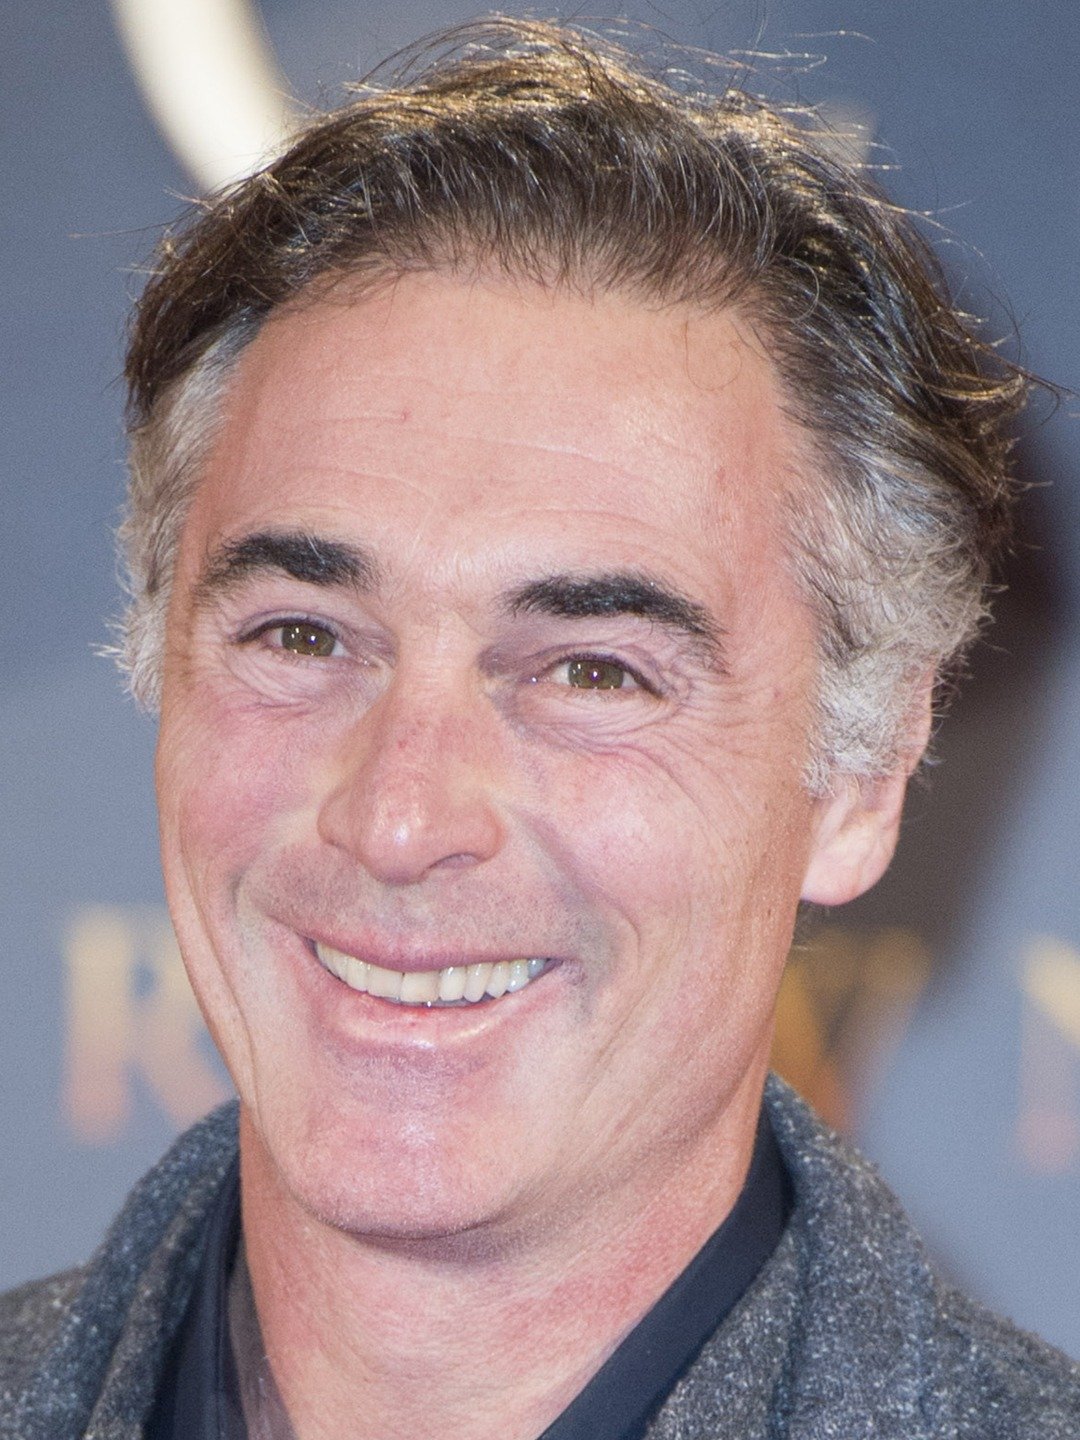 How tall is Greg Wise?